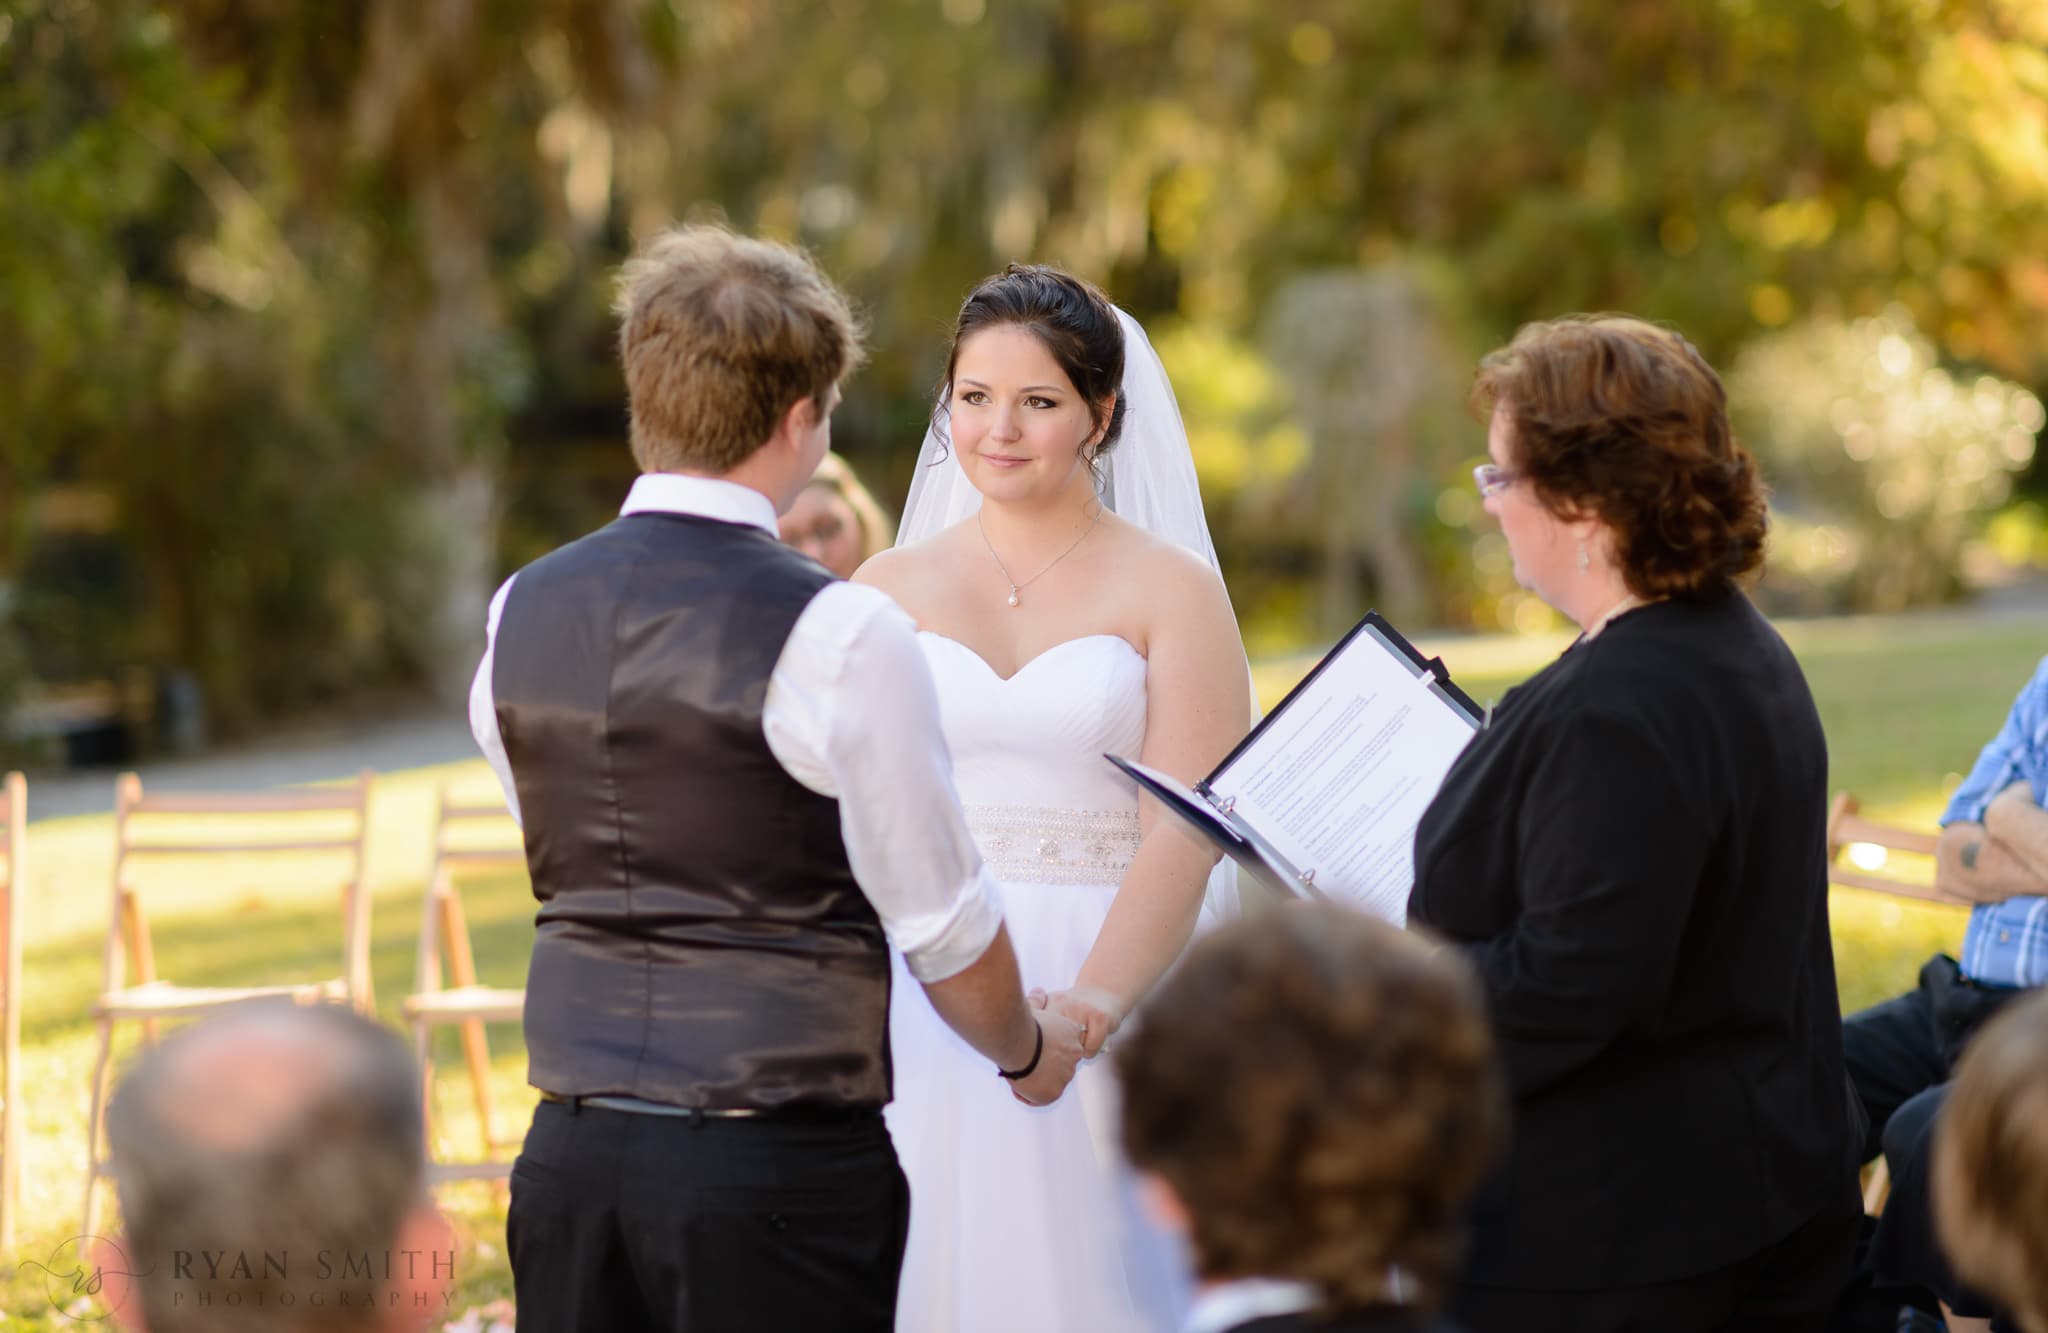 Bride looking at the groom during the ceremony - Magnolia Plantation